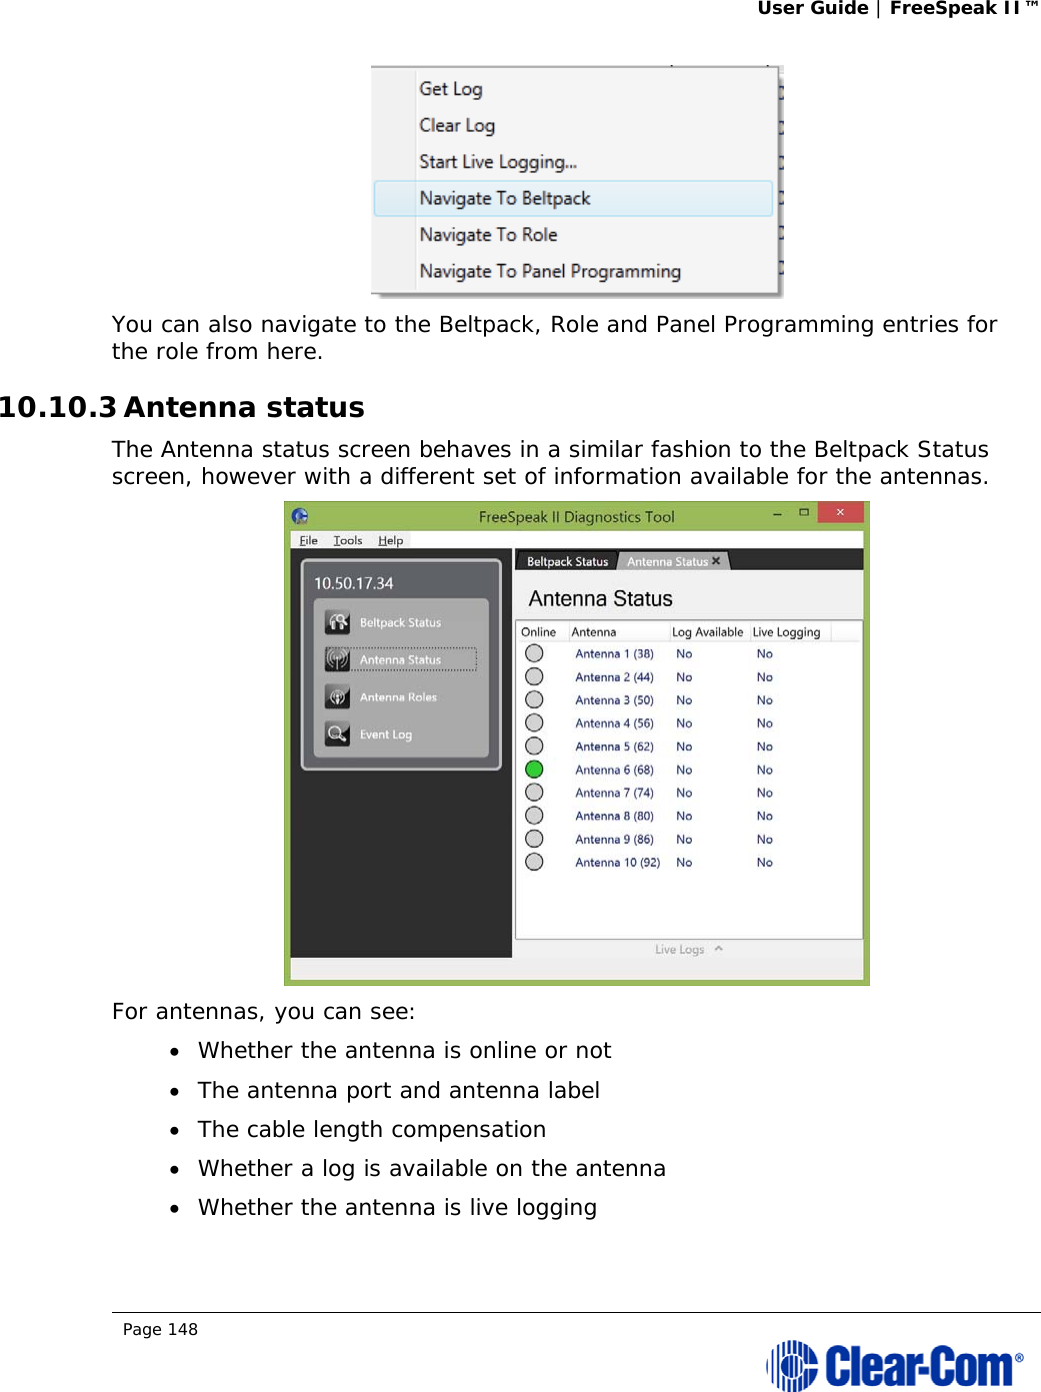 User Guide | FreeSpeak II™  Page 148   You can also navigate to the Beltpack, Role and Panel Programming entries for the role from here. 10.10.3 Antenna status The Antenna status screen behaves in a similar fashion to the Beltpack Status screen, however with a different set of information available for the antennas.  For antennas, you can see:  Whether the antenna is online or not  The antenna port and antenna label  The cable length compensation  Whether a log is available on the antenna  Whether the antenna is live logging 